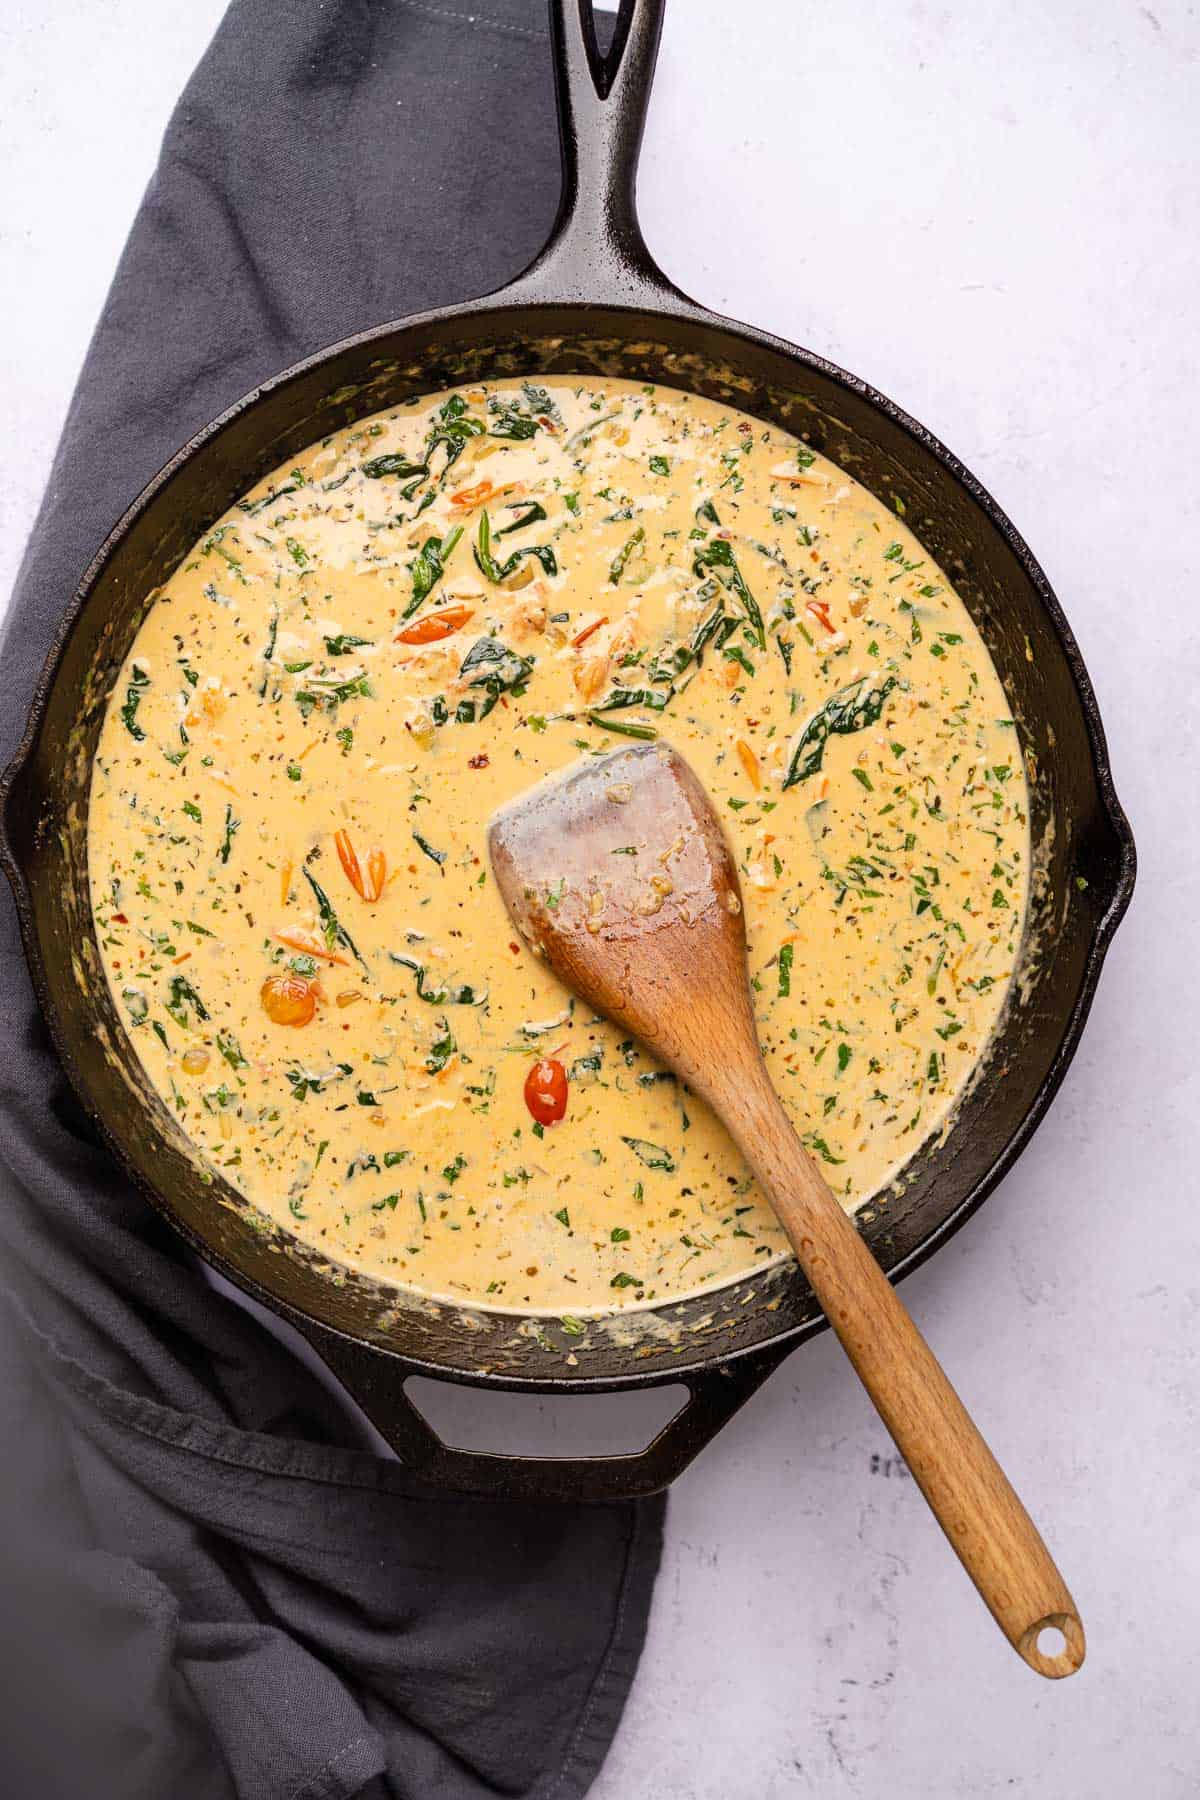 creamy sauce with herbs spinach and tomatoes